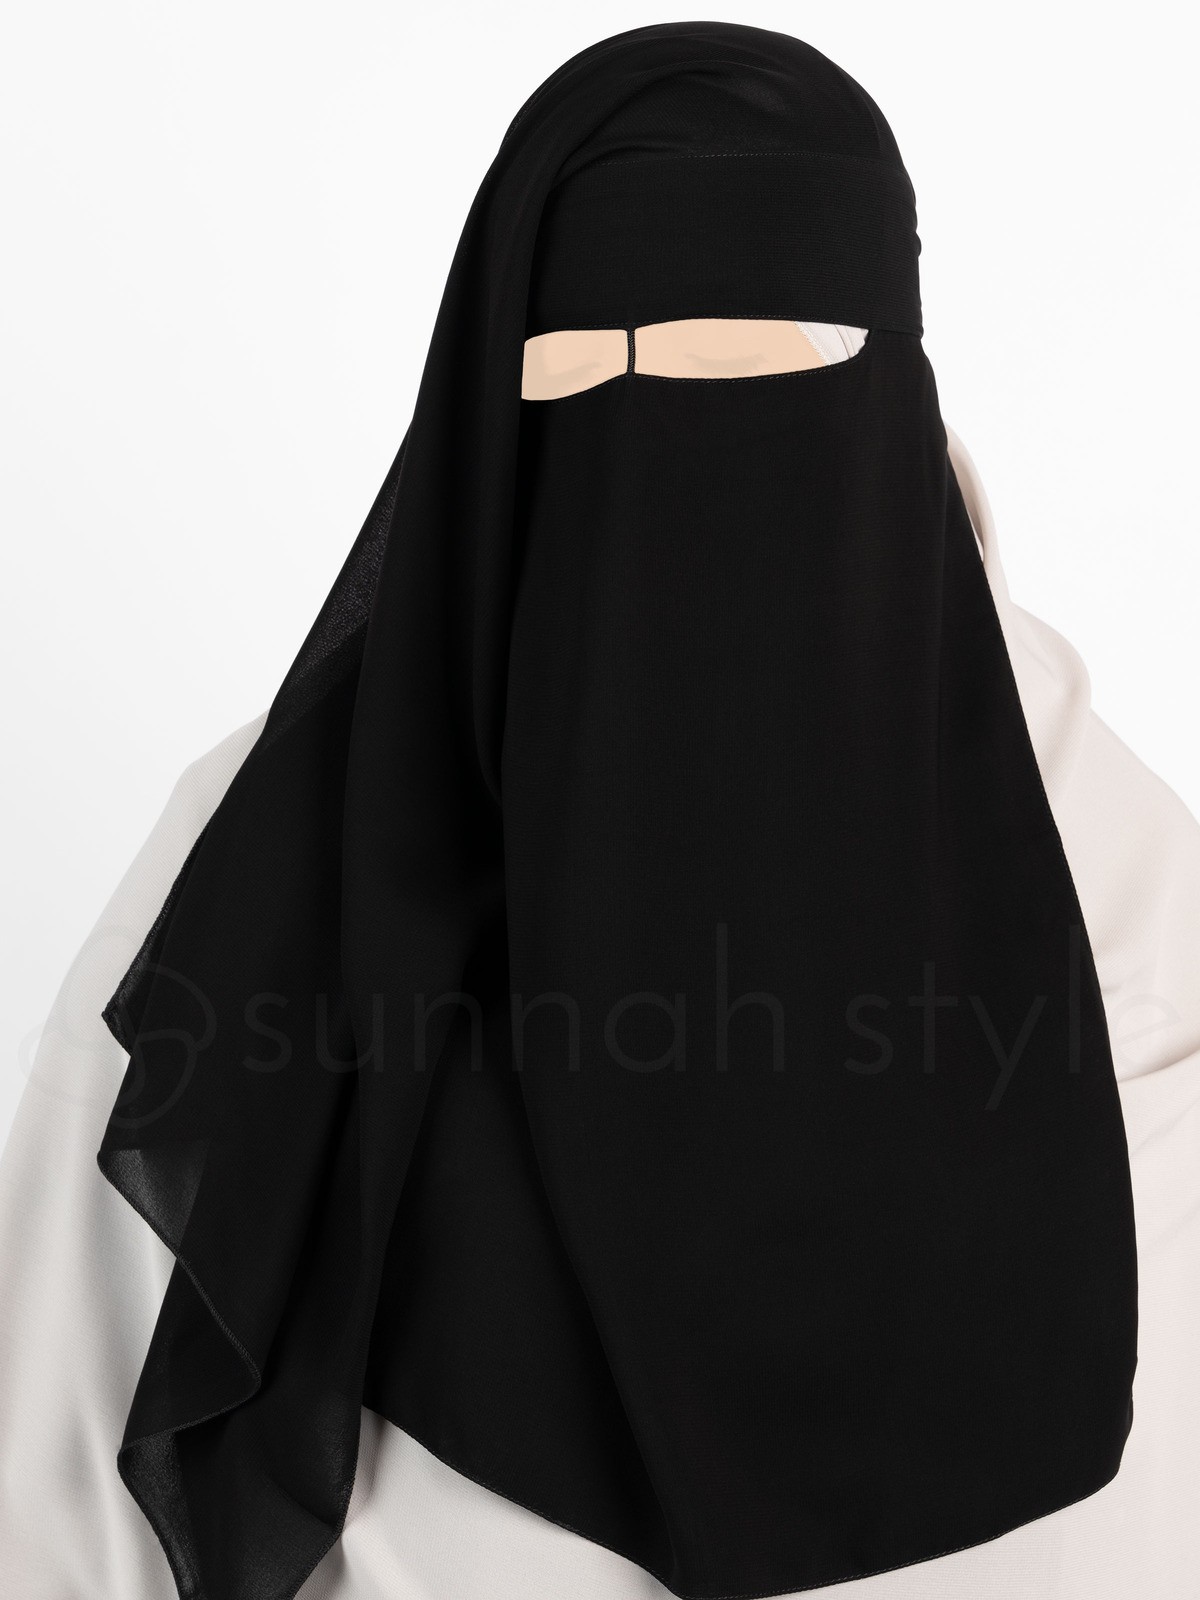 Sunnah Style - Two Layer Niqab /w Nose String (Black)